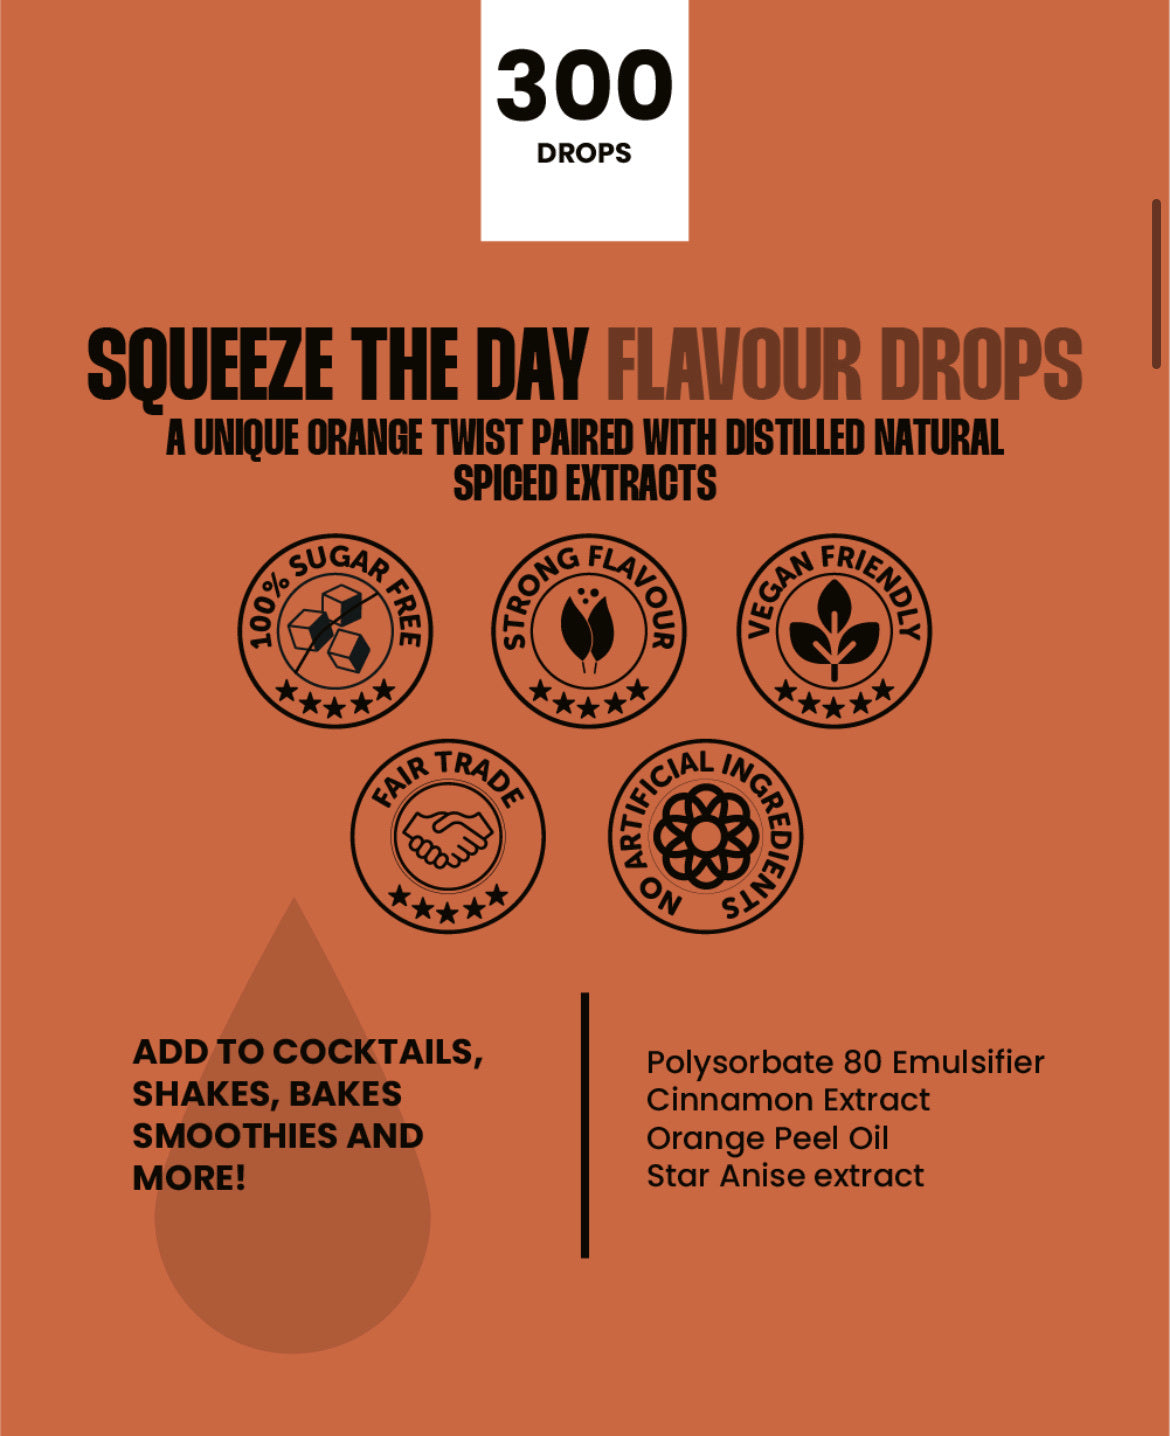 SQUEEZE THE DAY FLAVOUR DROPS